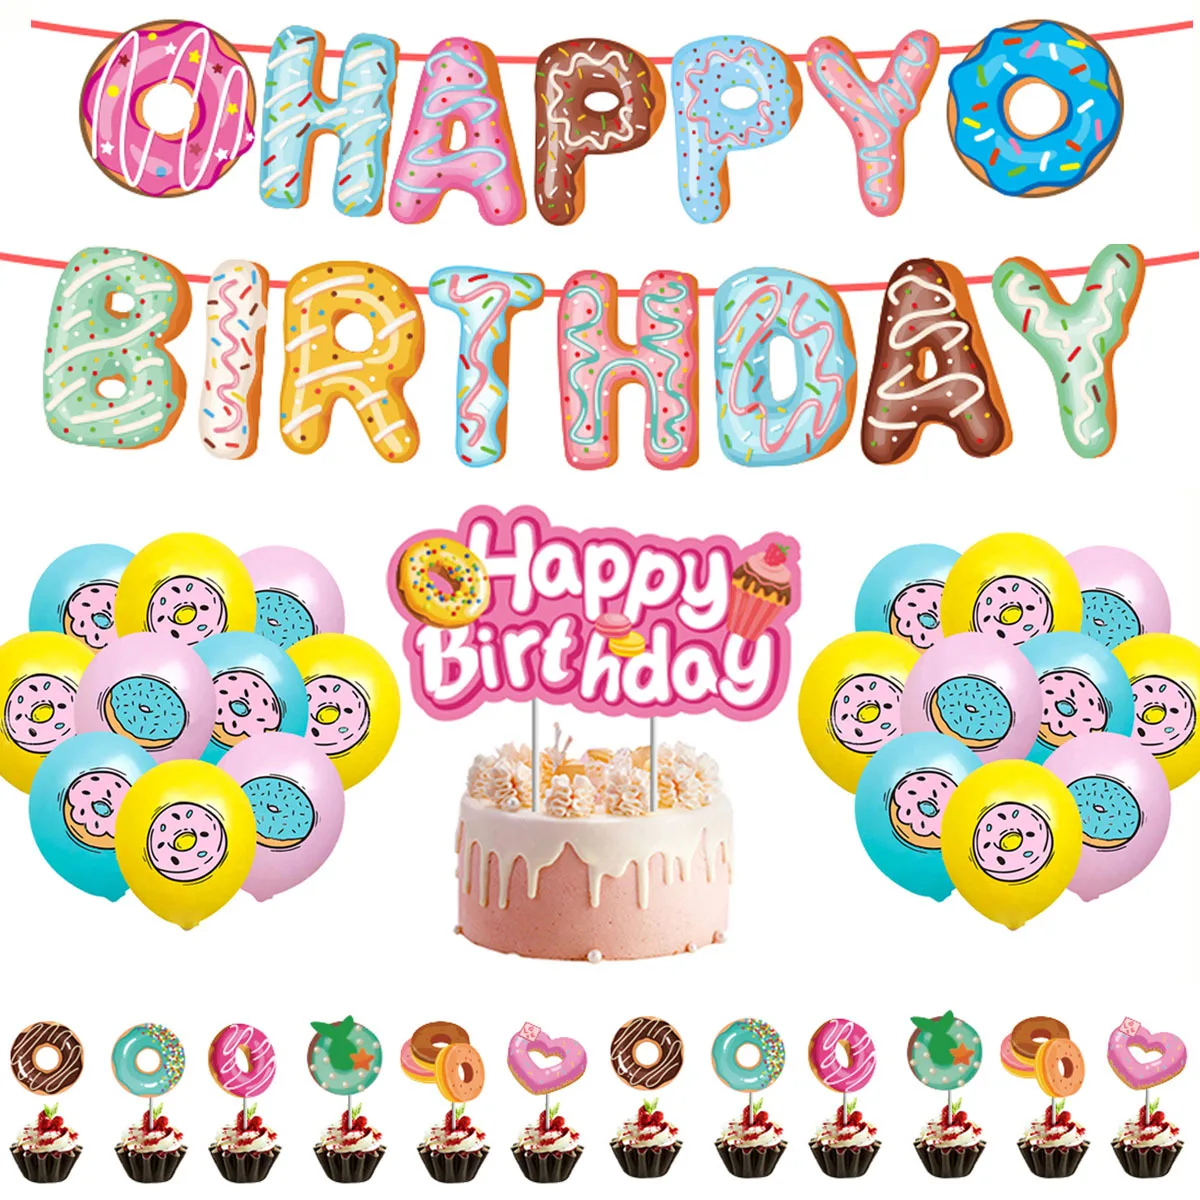 

Donut Themed Birthday Decoration Set Sweet Donut Balloons Happy Birthday Banner Cake Toppers for Donut Birthday Party Supplies